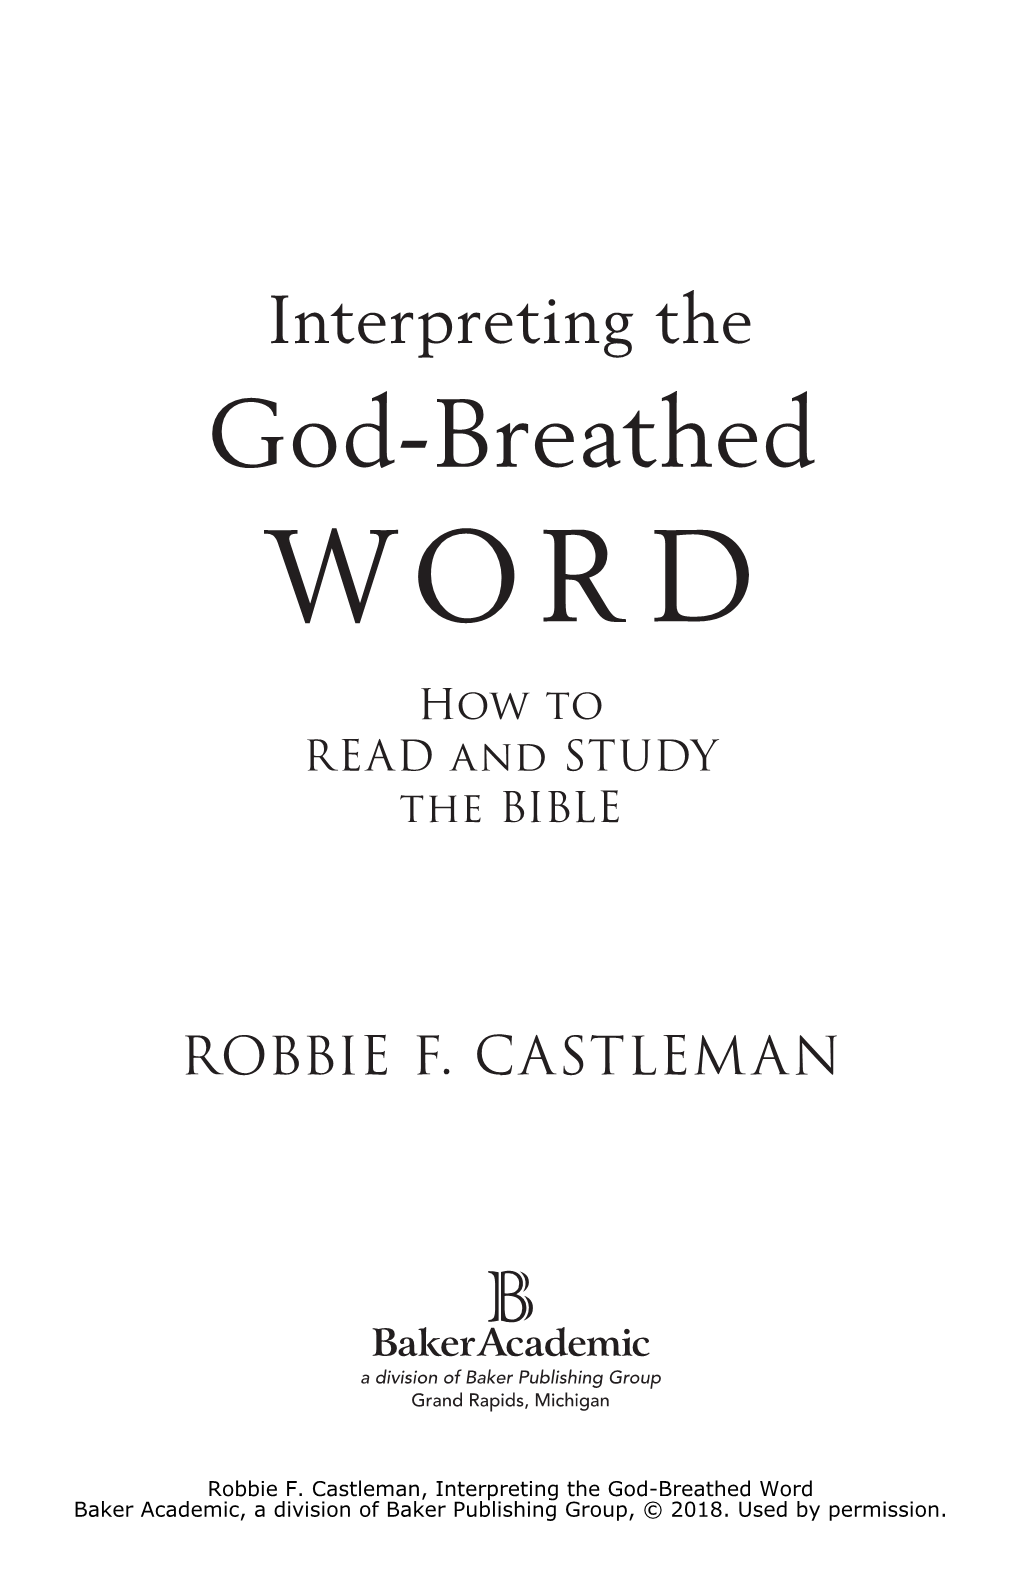 God-Breathed WORD How to READ and STUDY the BIBLE